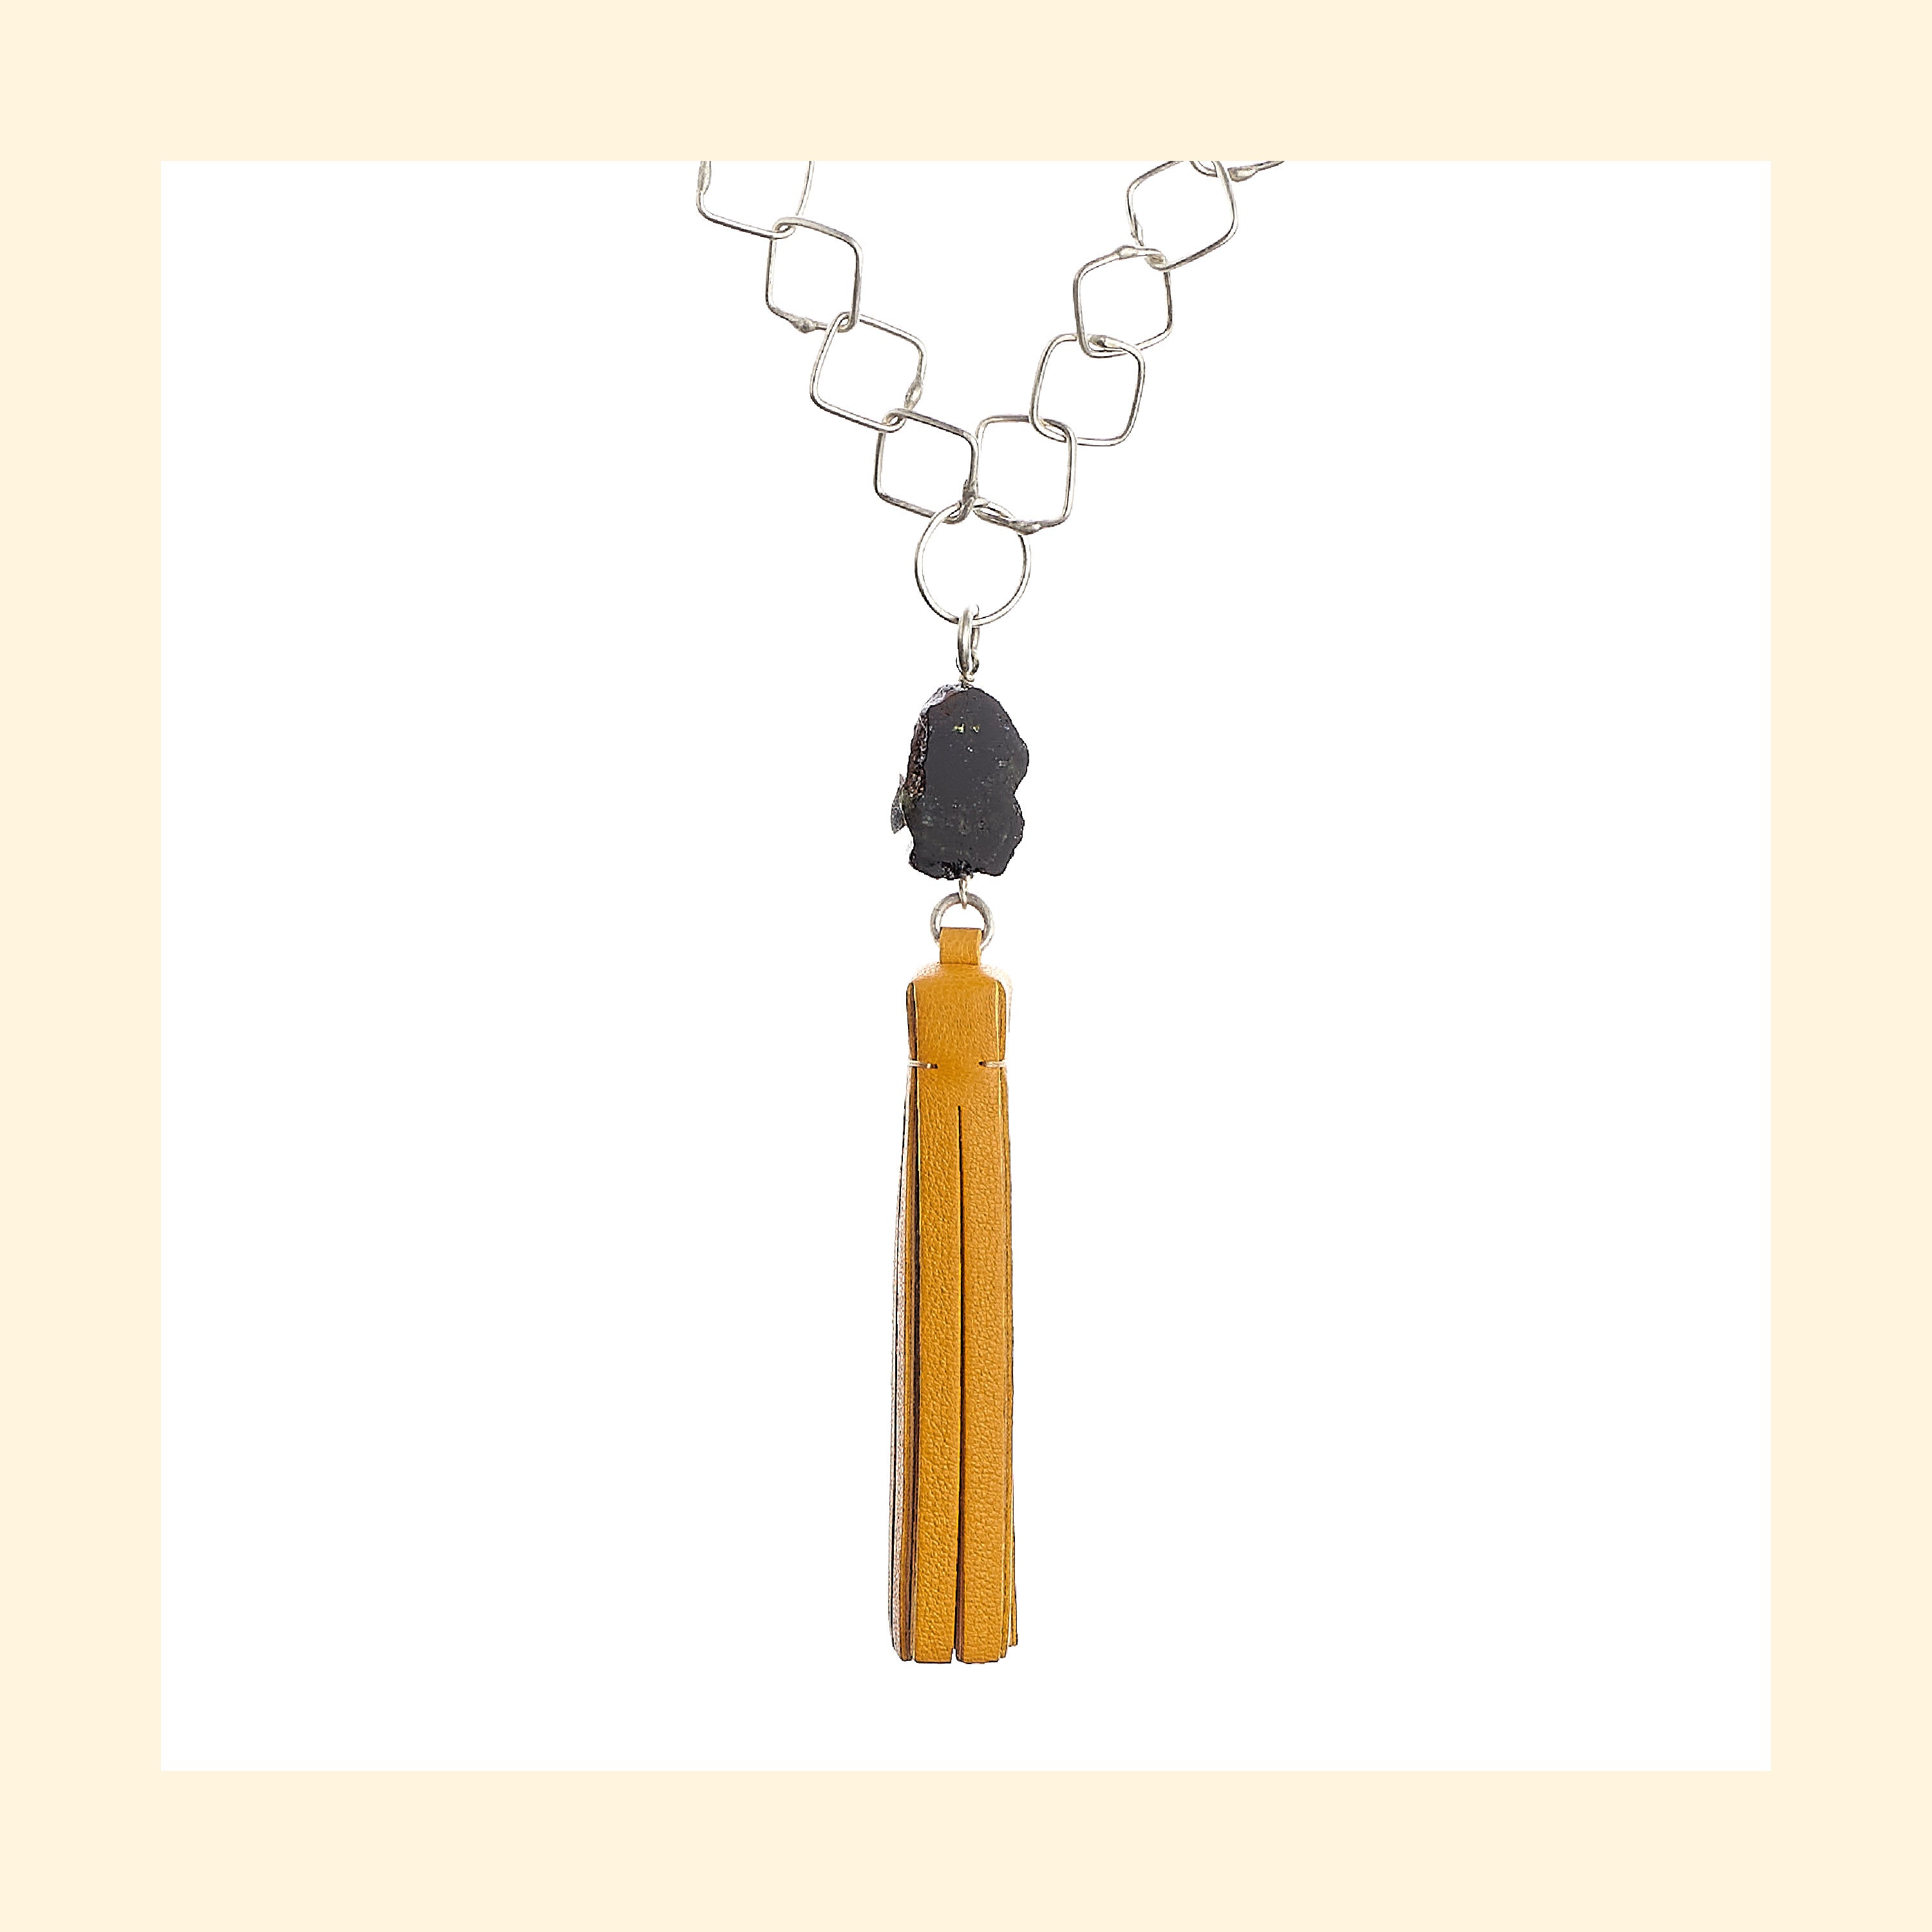 Tassel “Square” Necklace with Honey Leather and Tourmaline